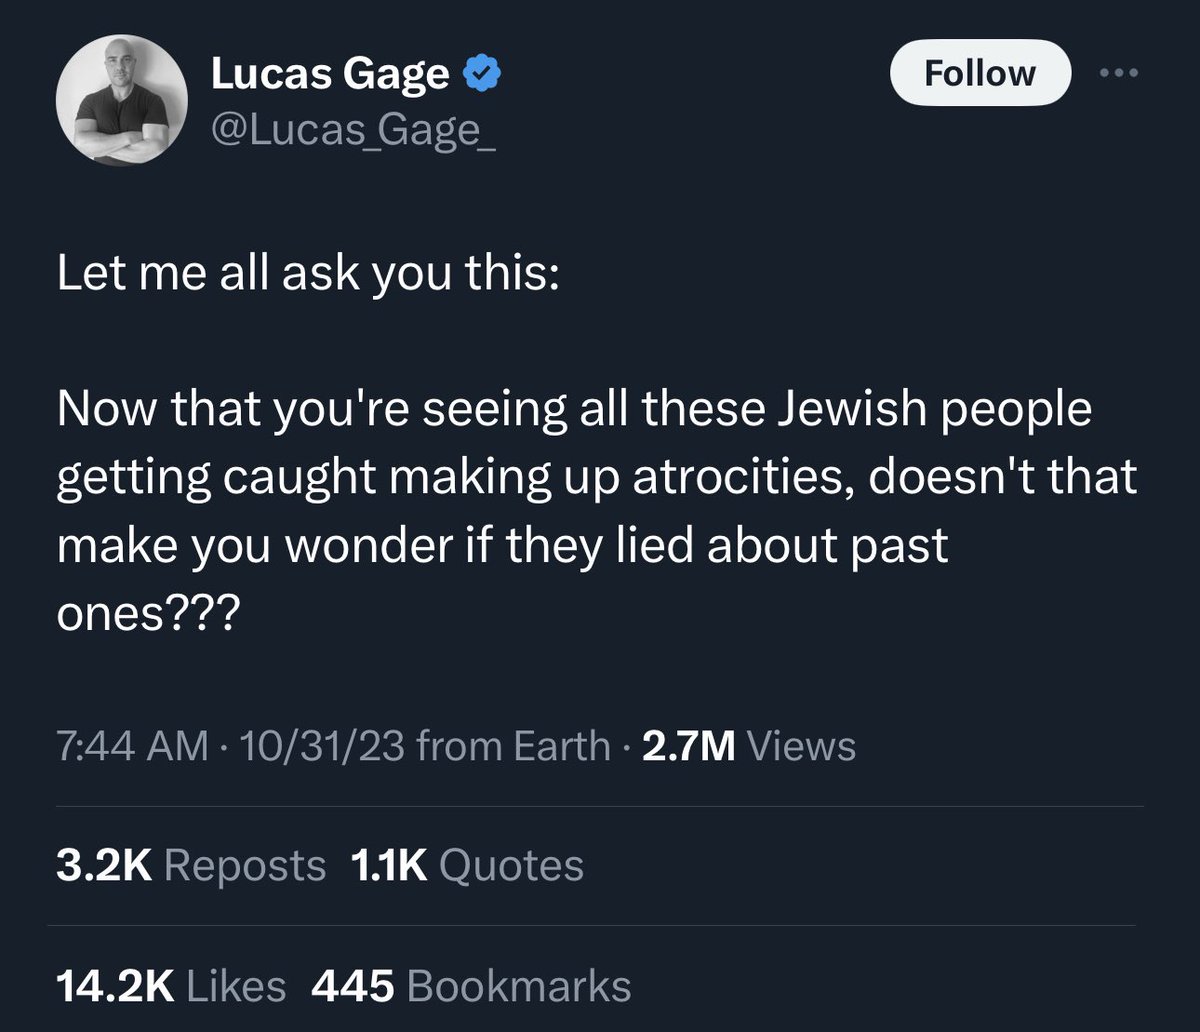 this dumb ass nazi holocaust denial shit has 14k likes rn while ppl are complaining about “river to the sea” and doxxing pro palestinian college students. i guess ultra-zionists don’t see nazis as big as a threat as those who want emancipation for palestinians.